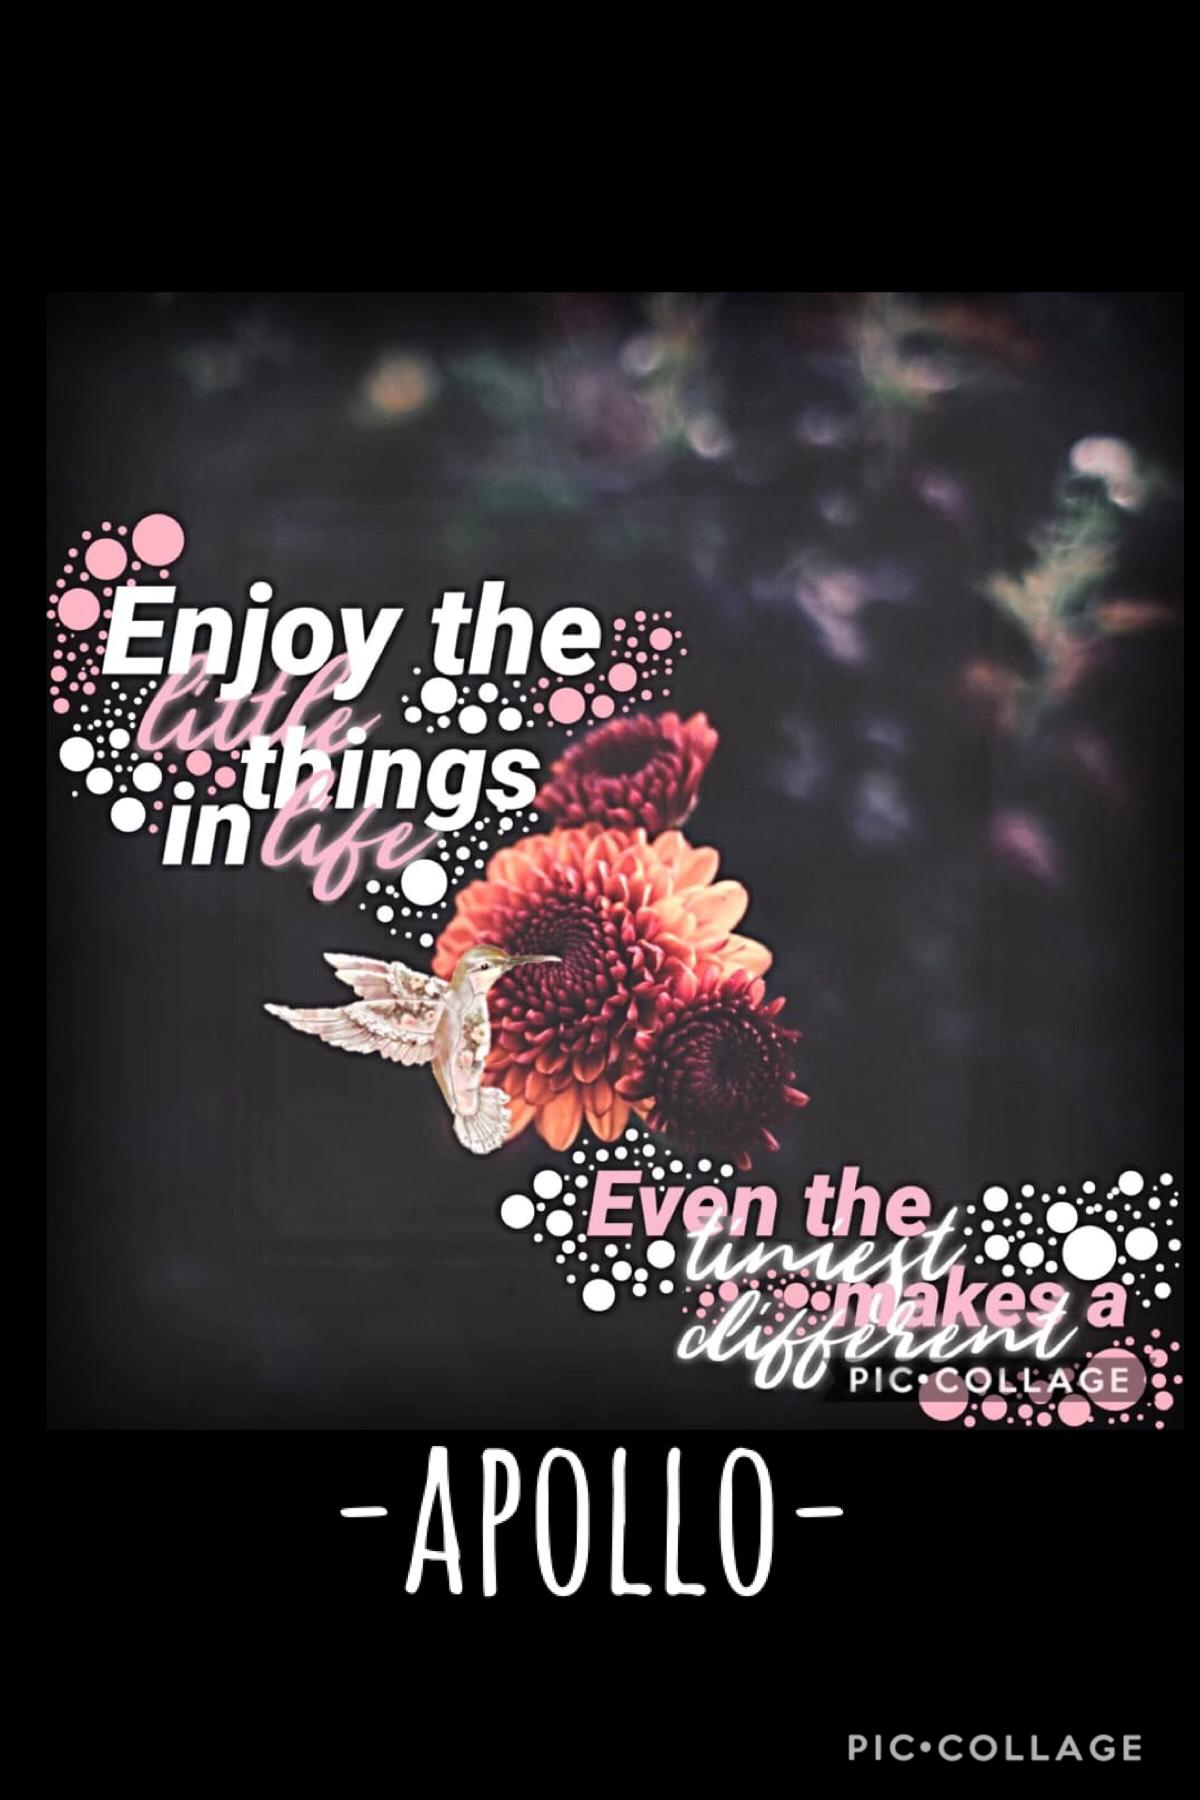 🌸TAP🌺
Please follow-Apollo- , they have great collages and just they are amazing ❤️. Also , sorry I have been gone😬